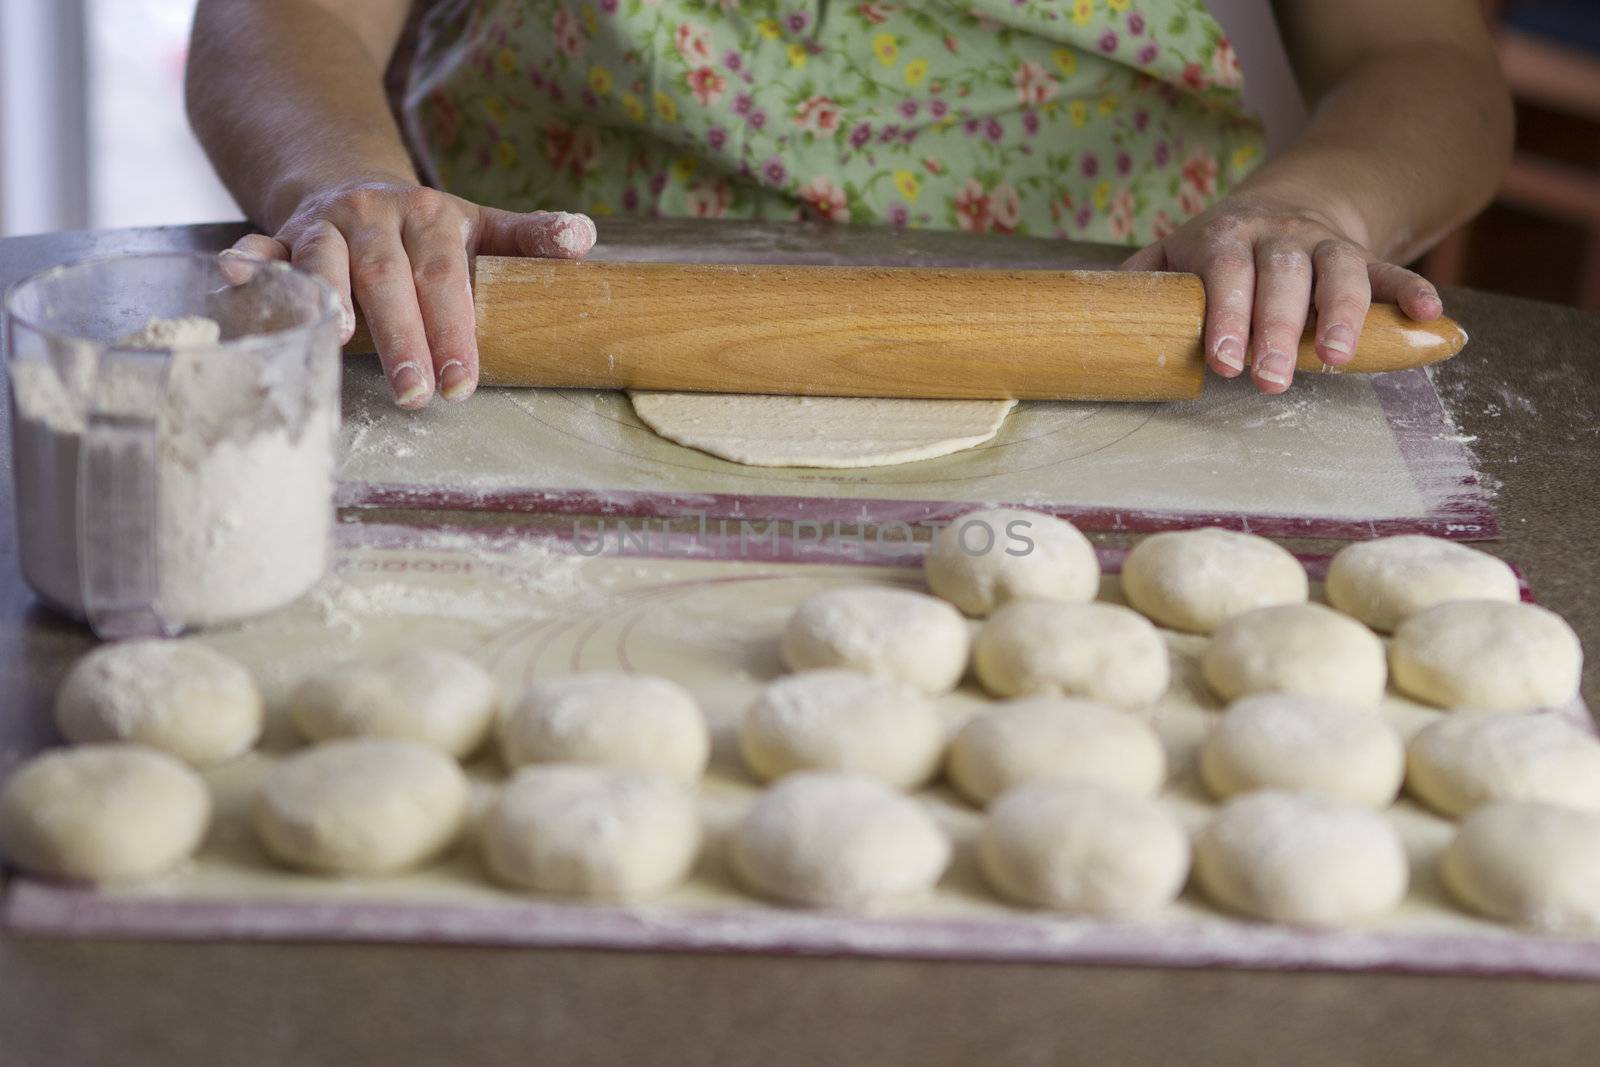 A lady flatten the dough to make flat bread pizzas using classic wooden roller.